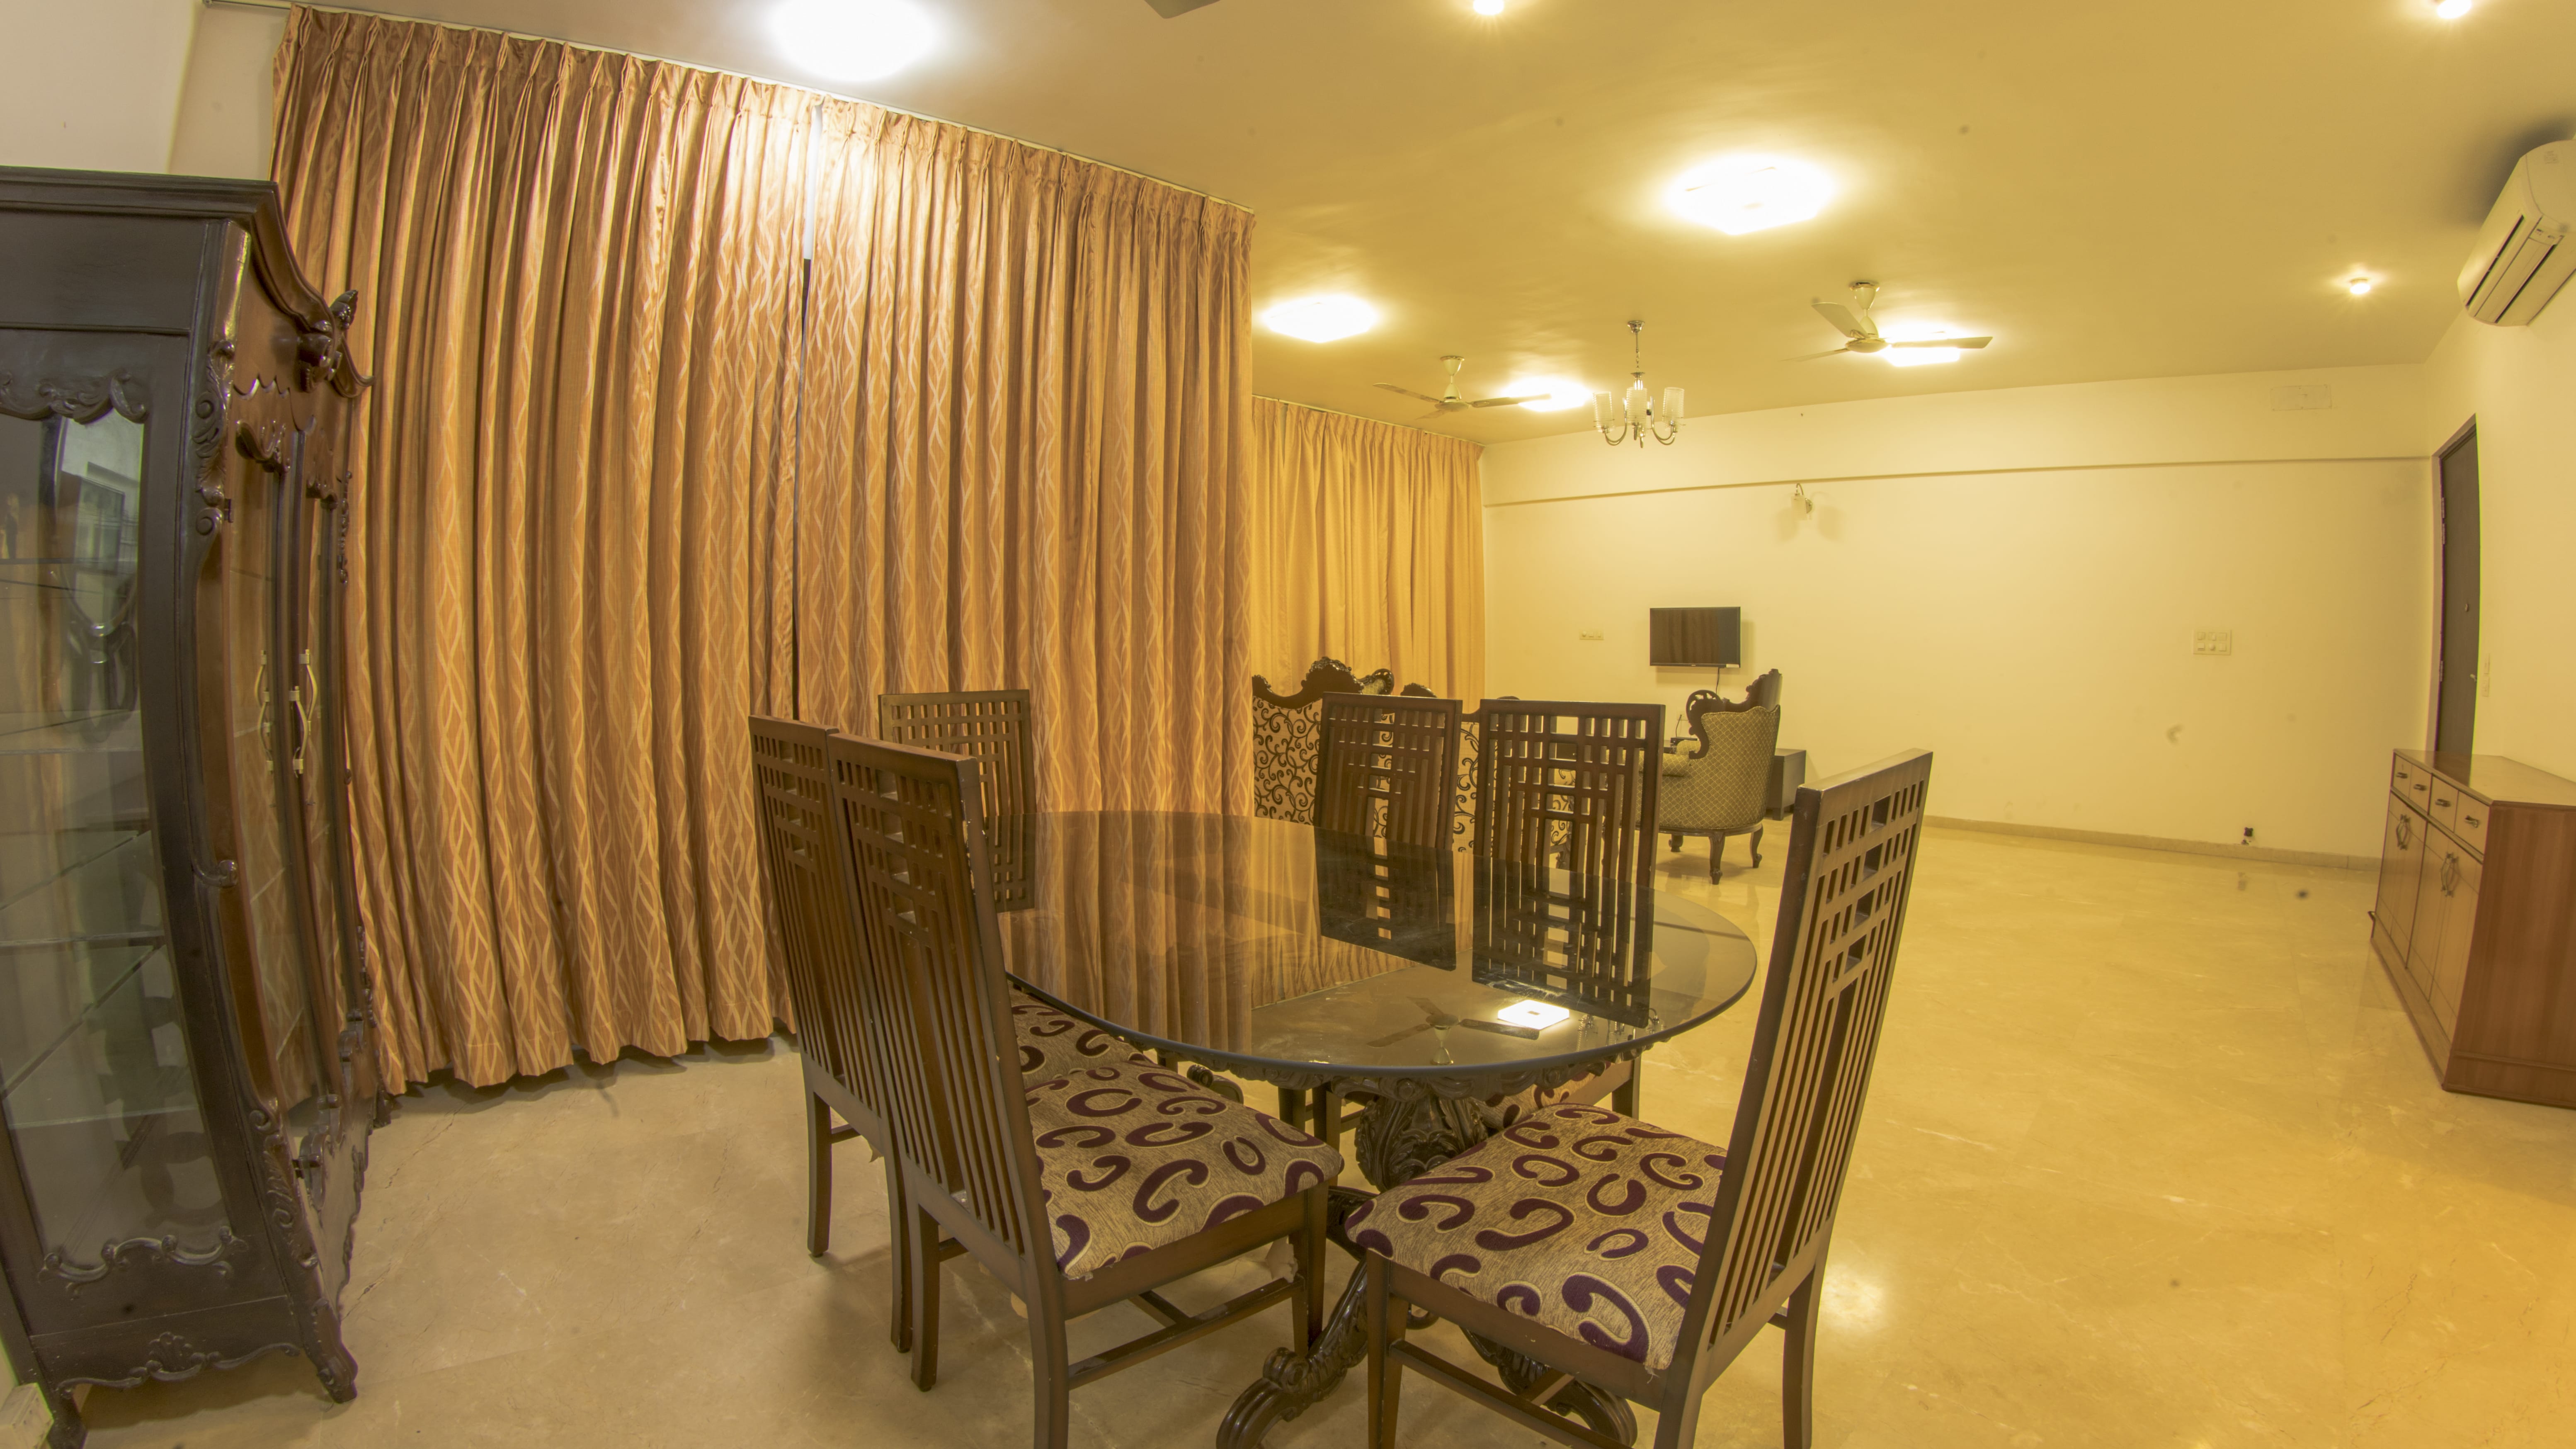 Find The Best PGs & Hostels For Both Men & Women In Chennai & With AtRumaH Starting At ₹4300*.